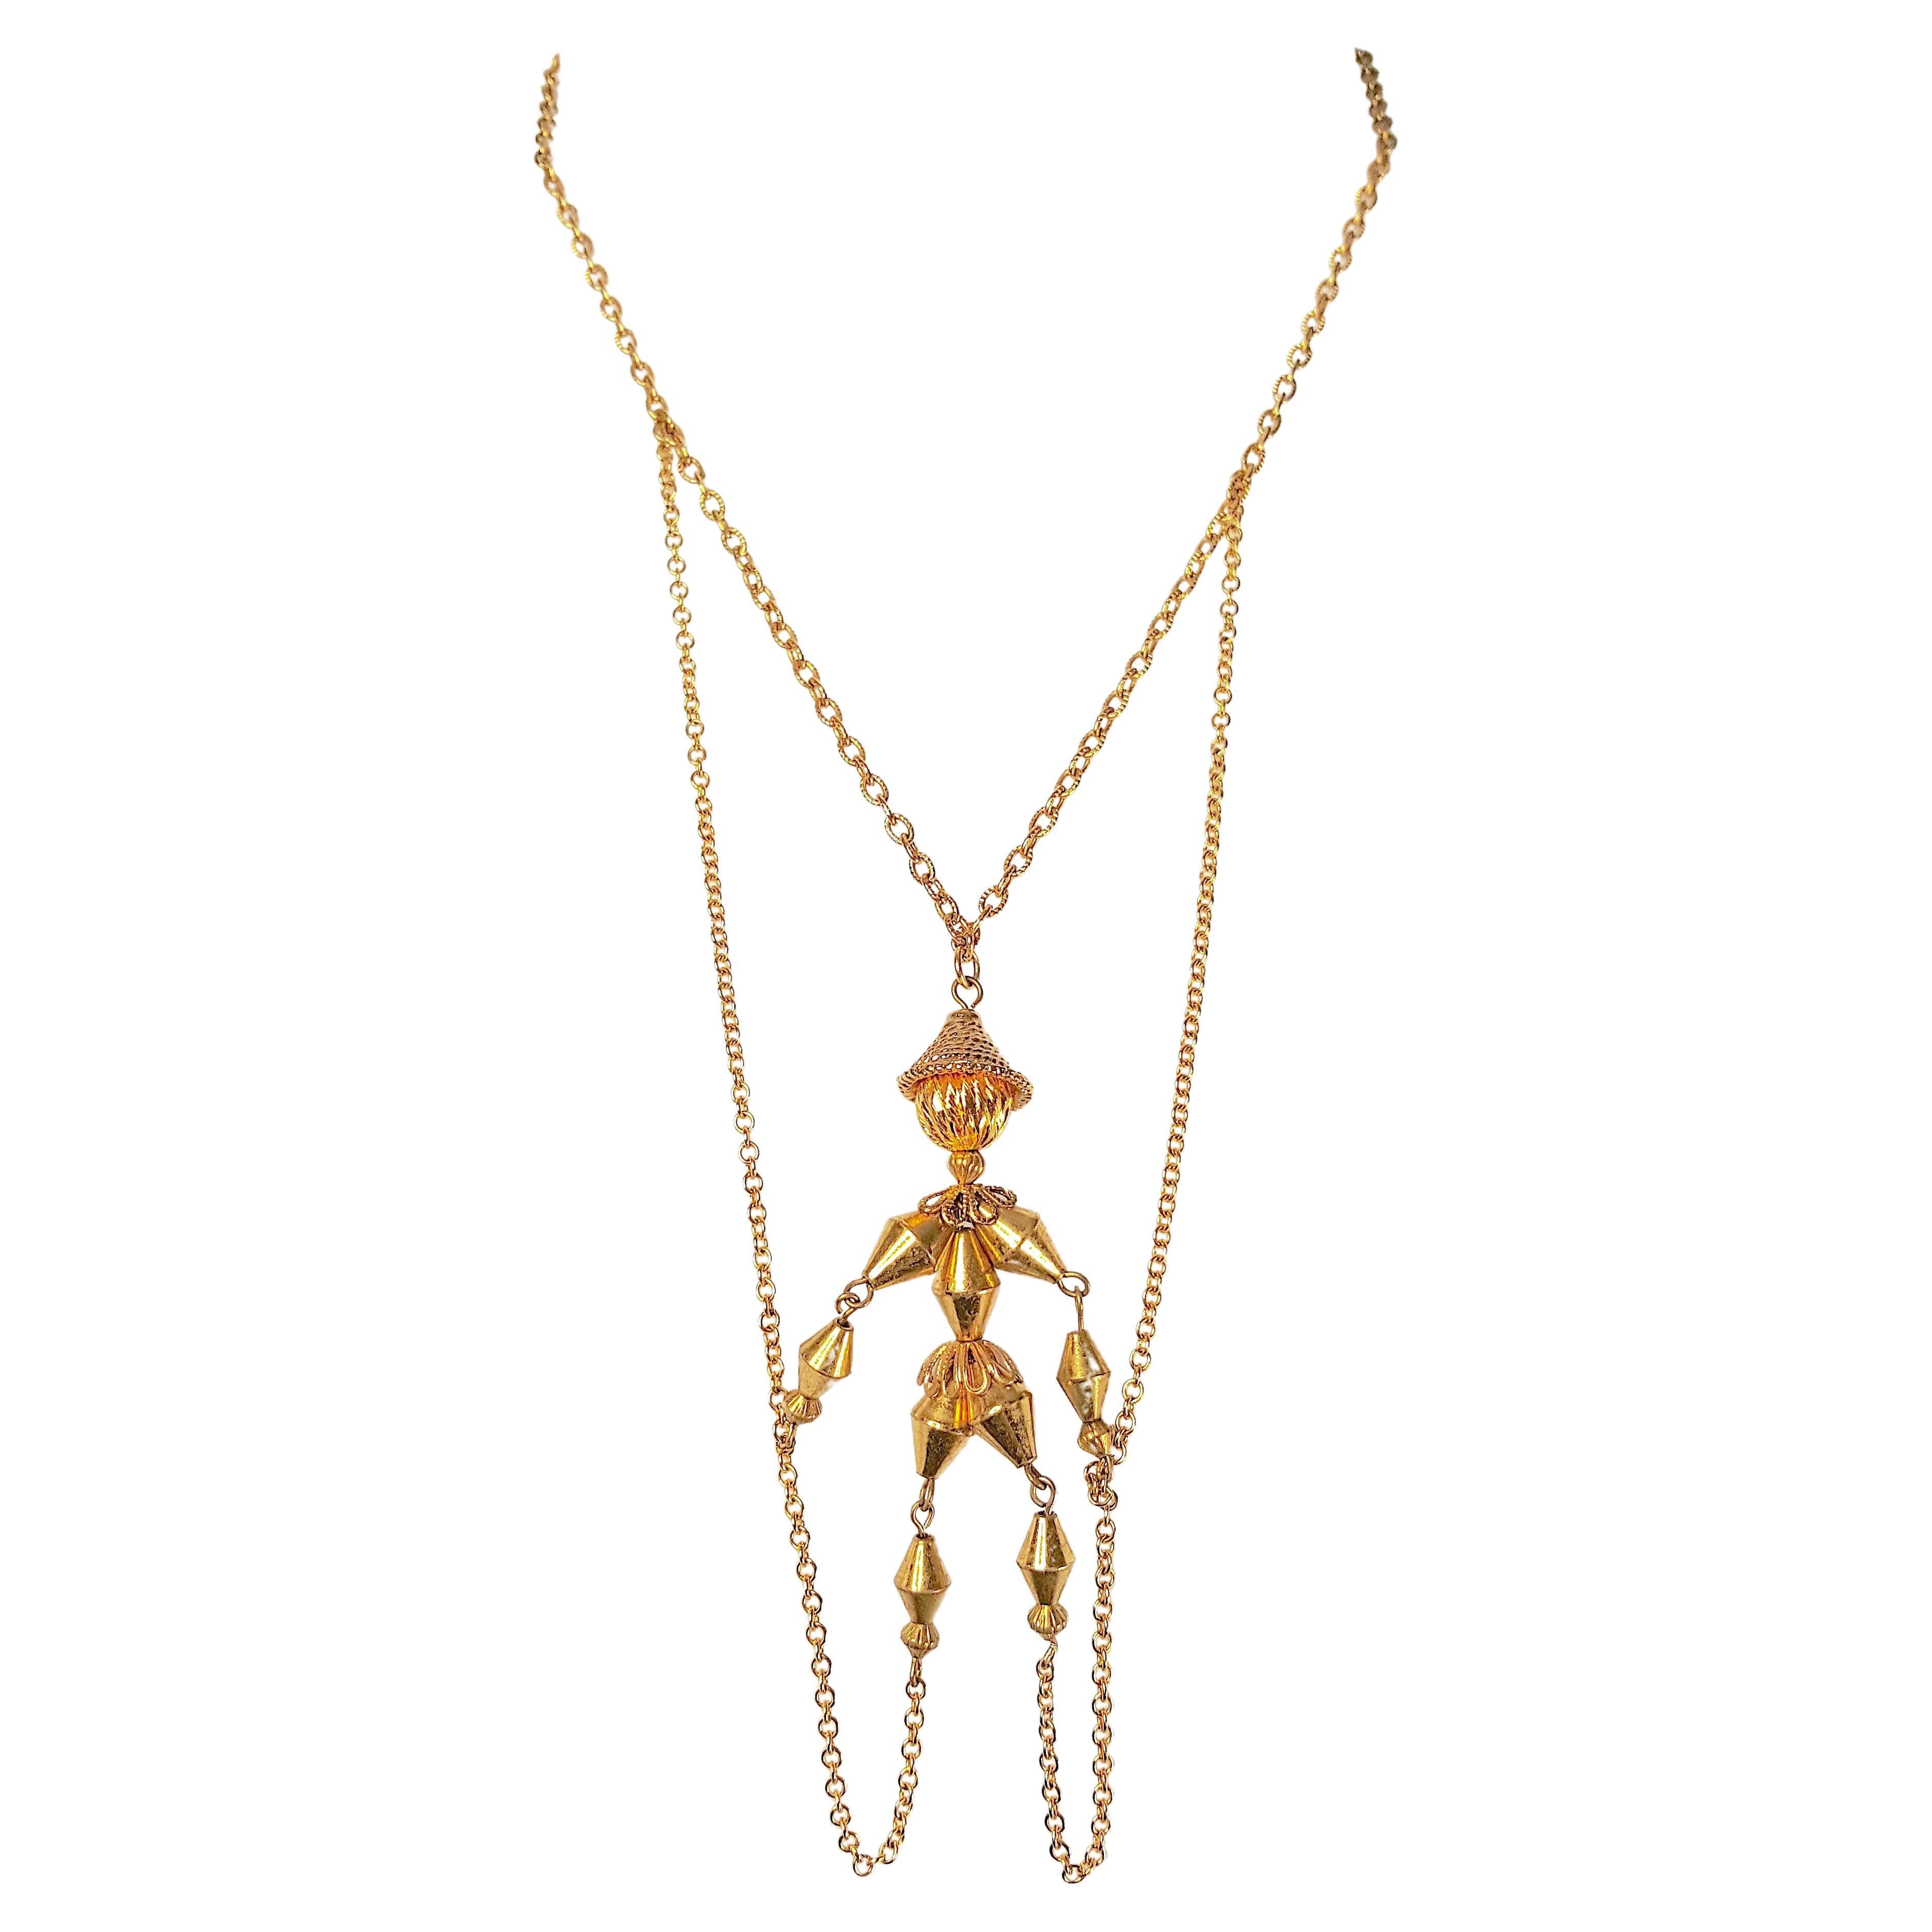 KineticPuppetStringsPinocchio GoldTexturedChainLink3Strand Early20thC. Necklace For Sale